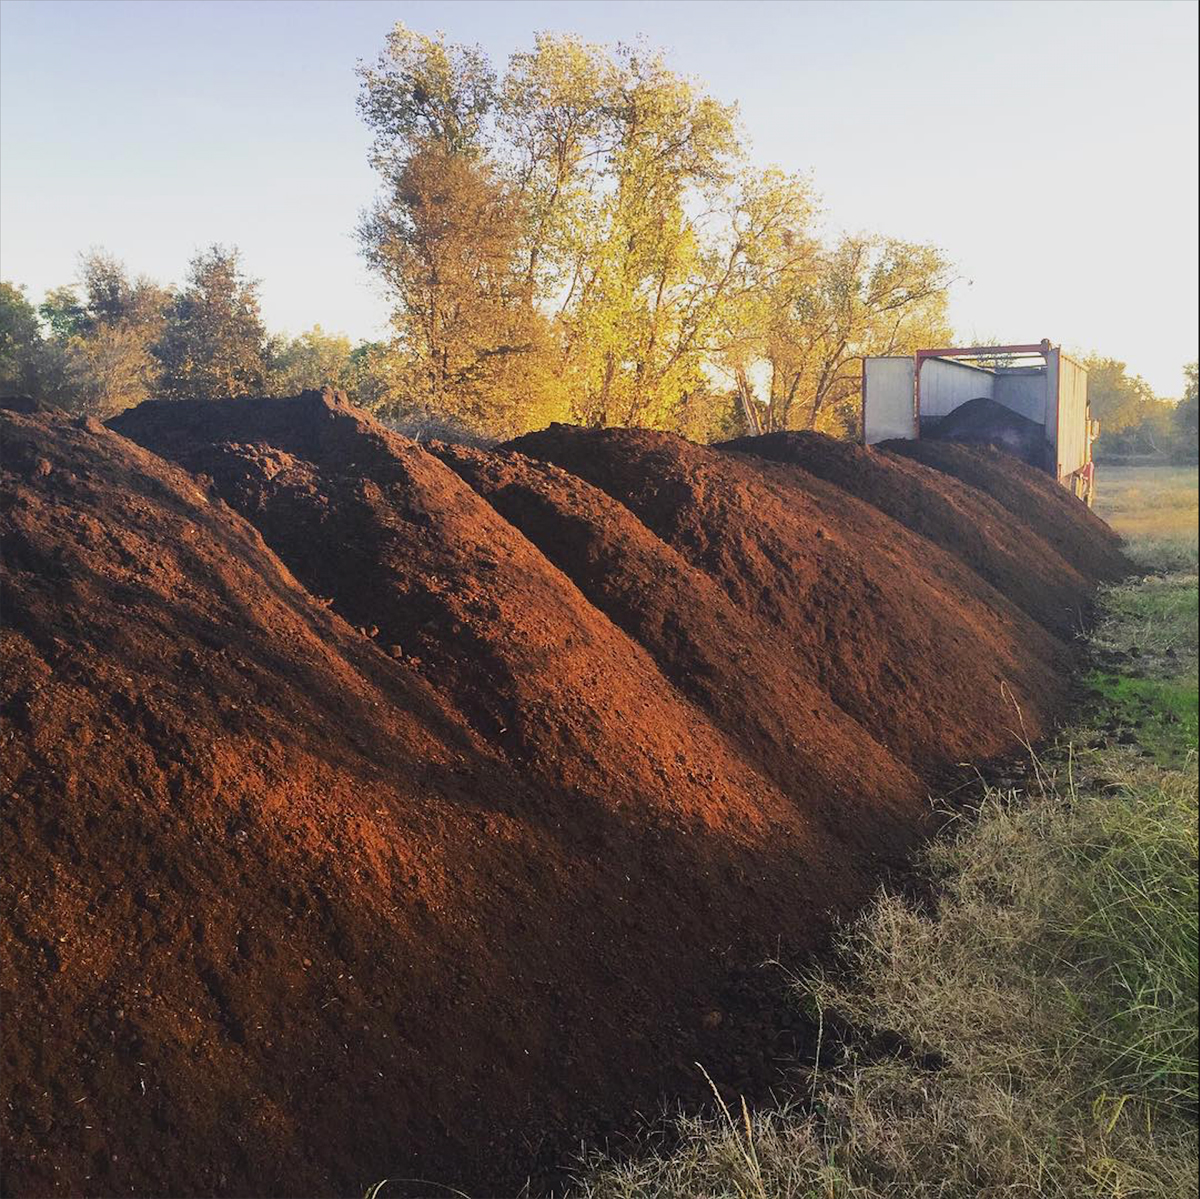 150 tons of compost to be spread on the Massa almond orchards.